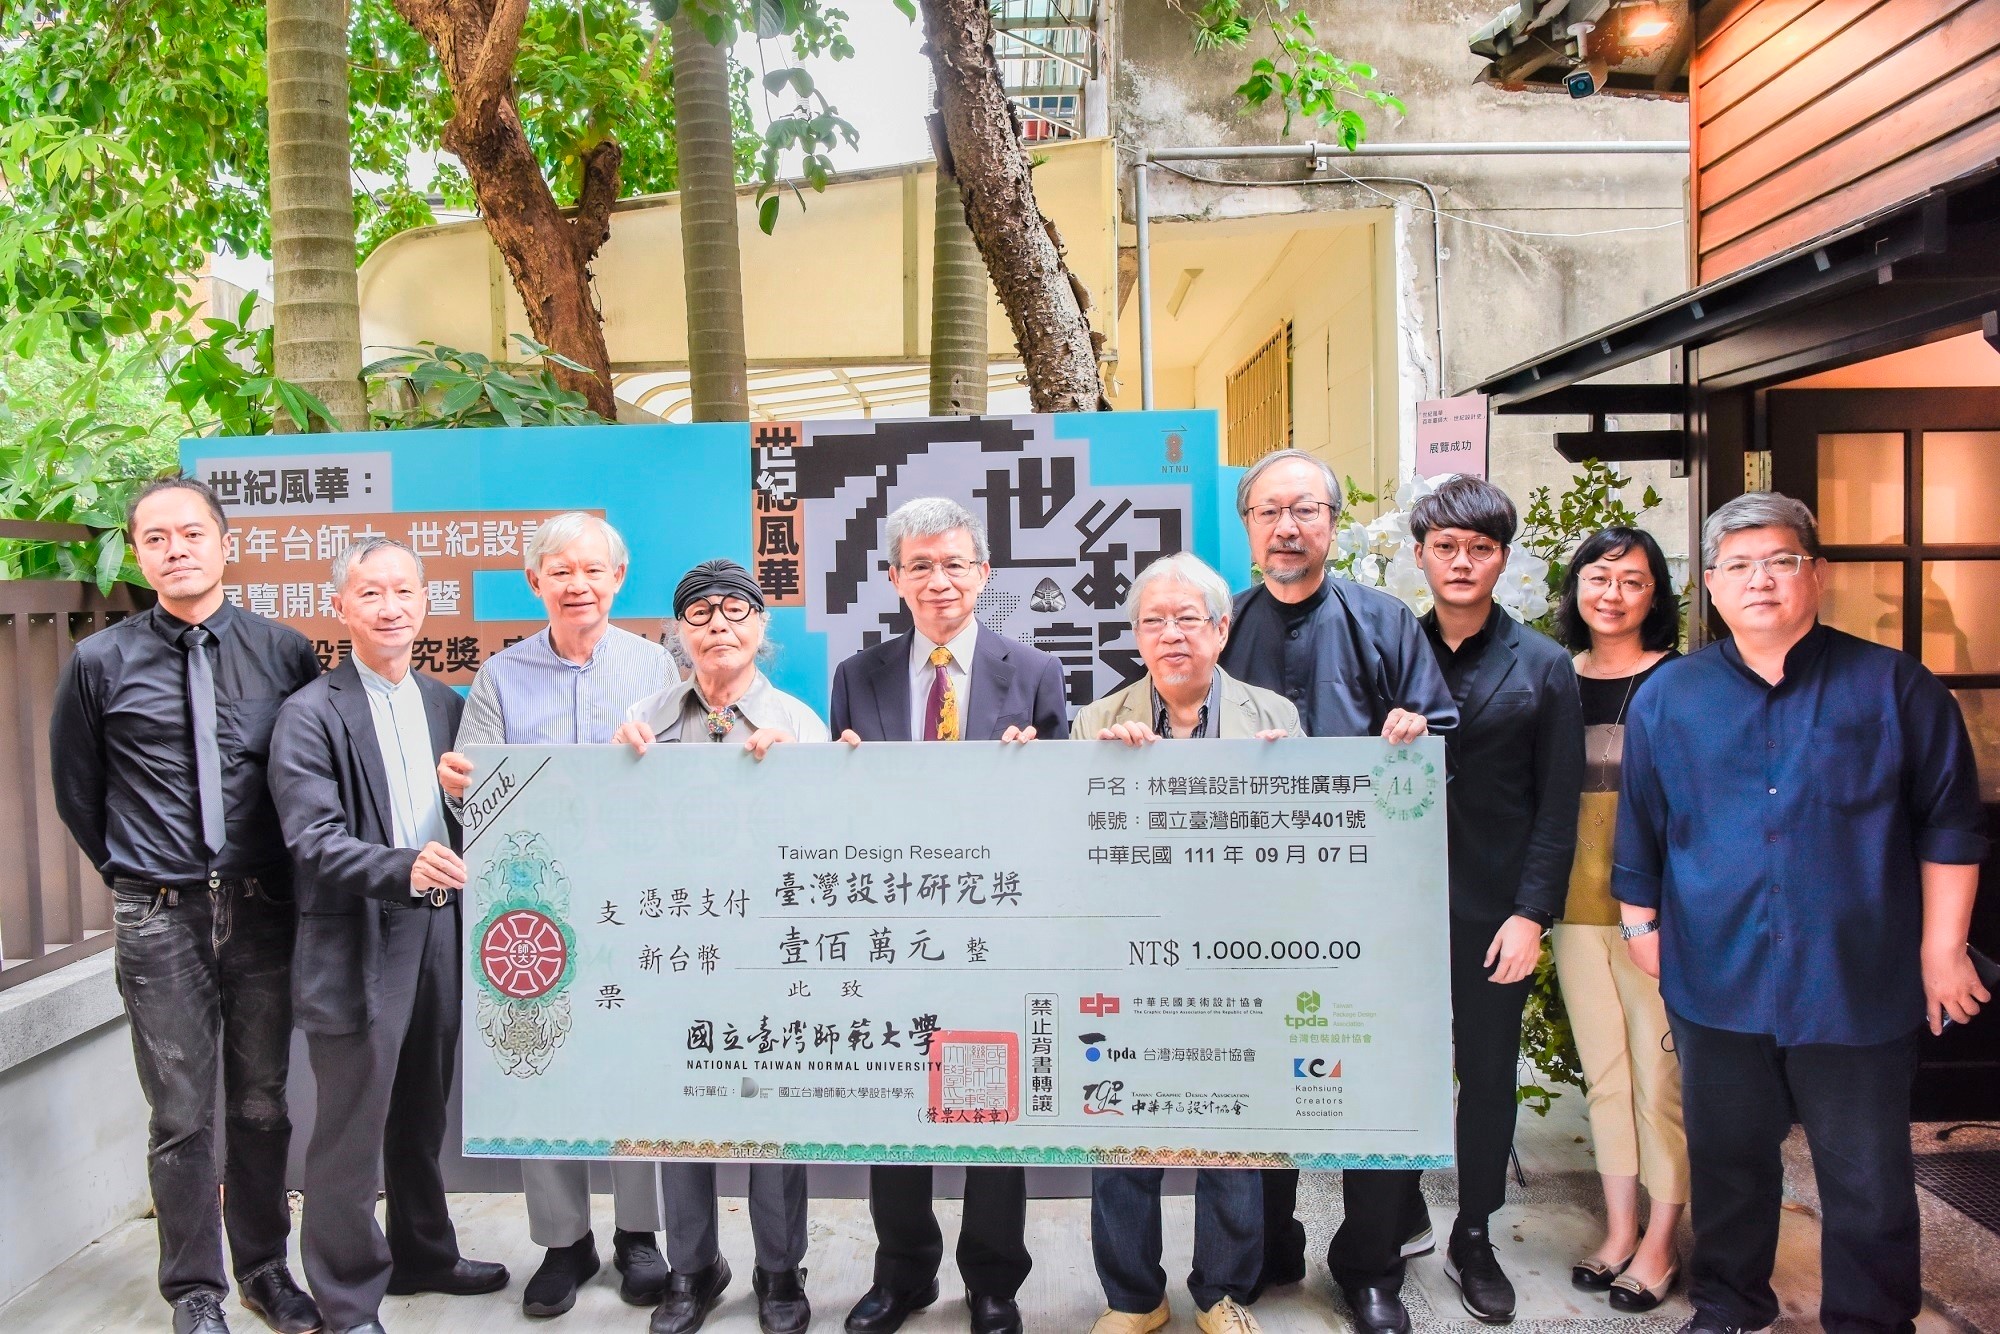 With the support of Taiwanese entrepreneurs and senior designers, Professor Lin Pan-Sung raised 1 million to establish the 